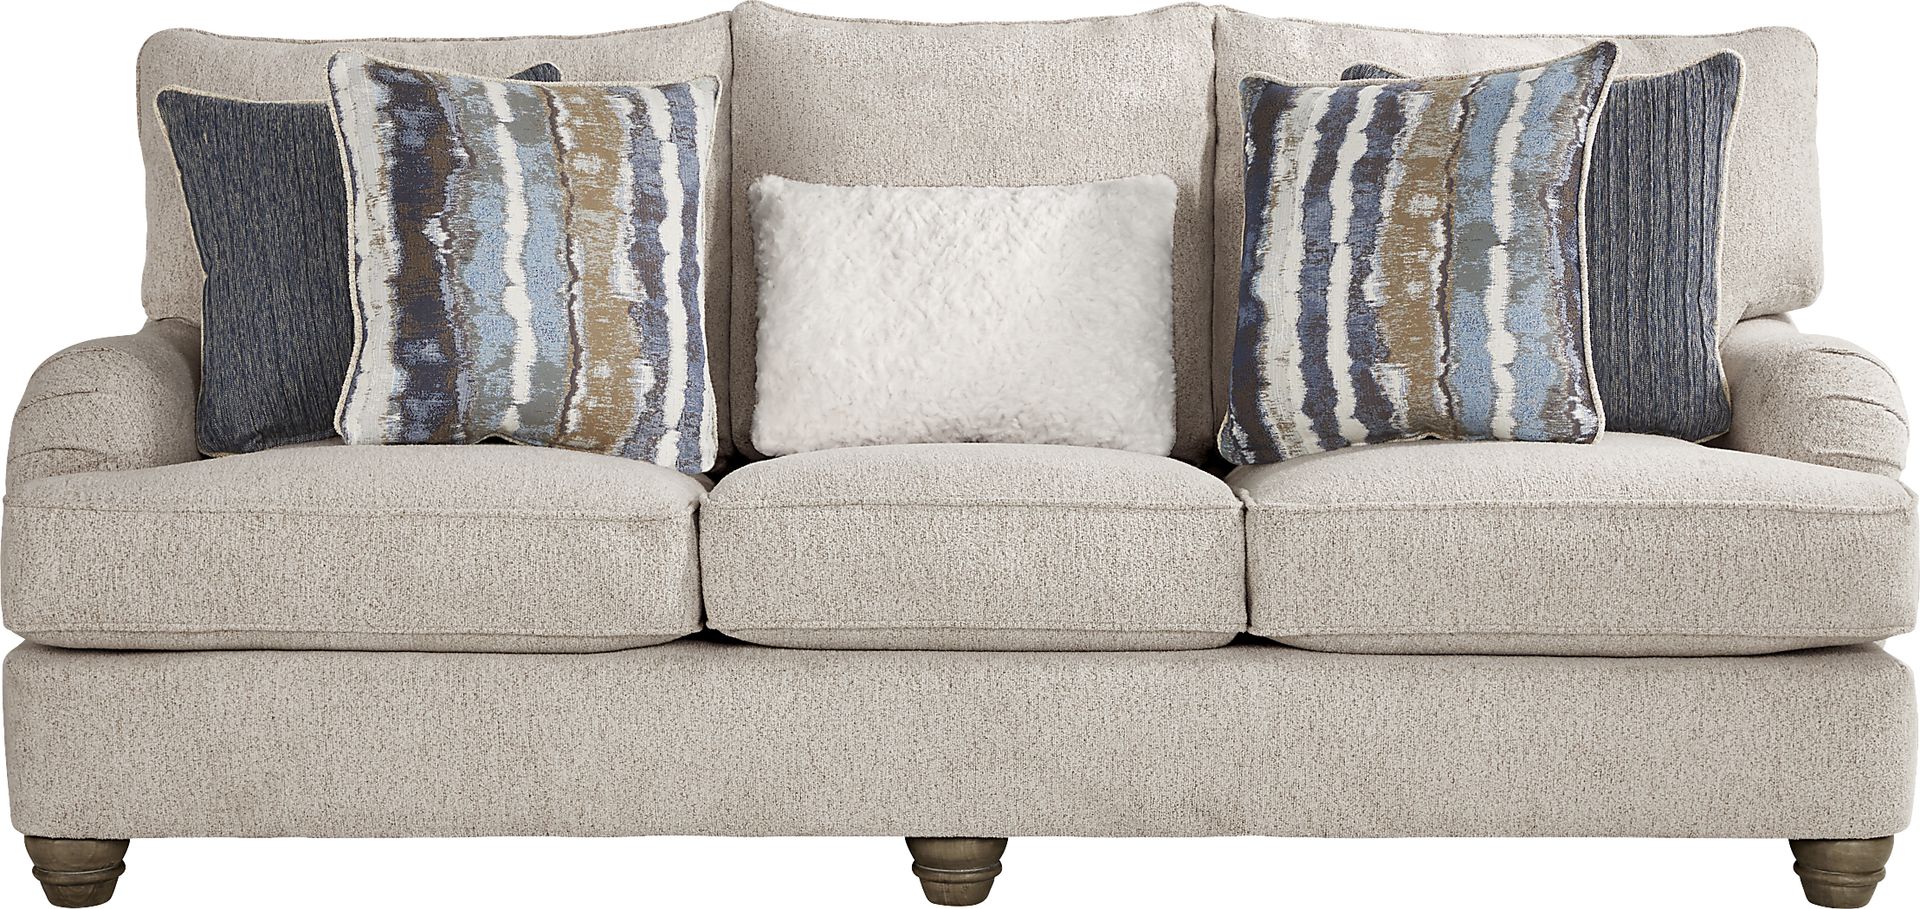 Beverly Glen Beige Chenille Fabric Sofa | Rooms to Go